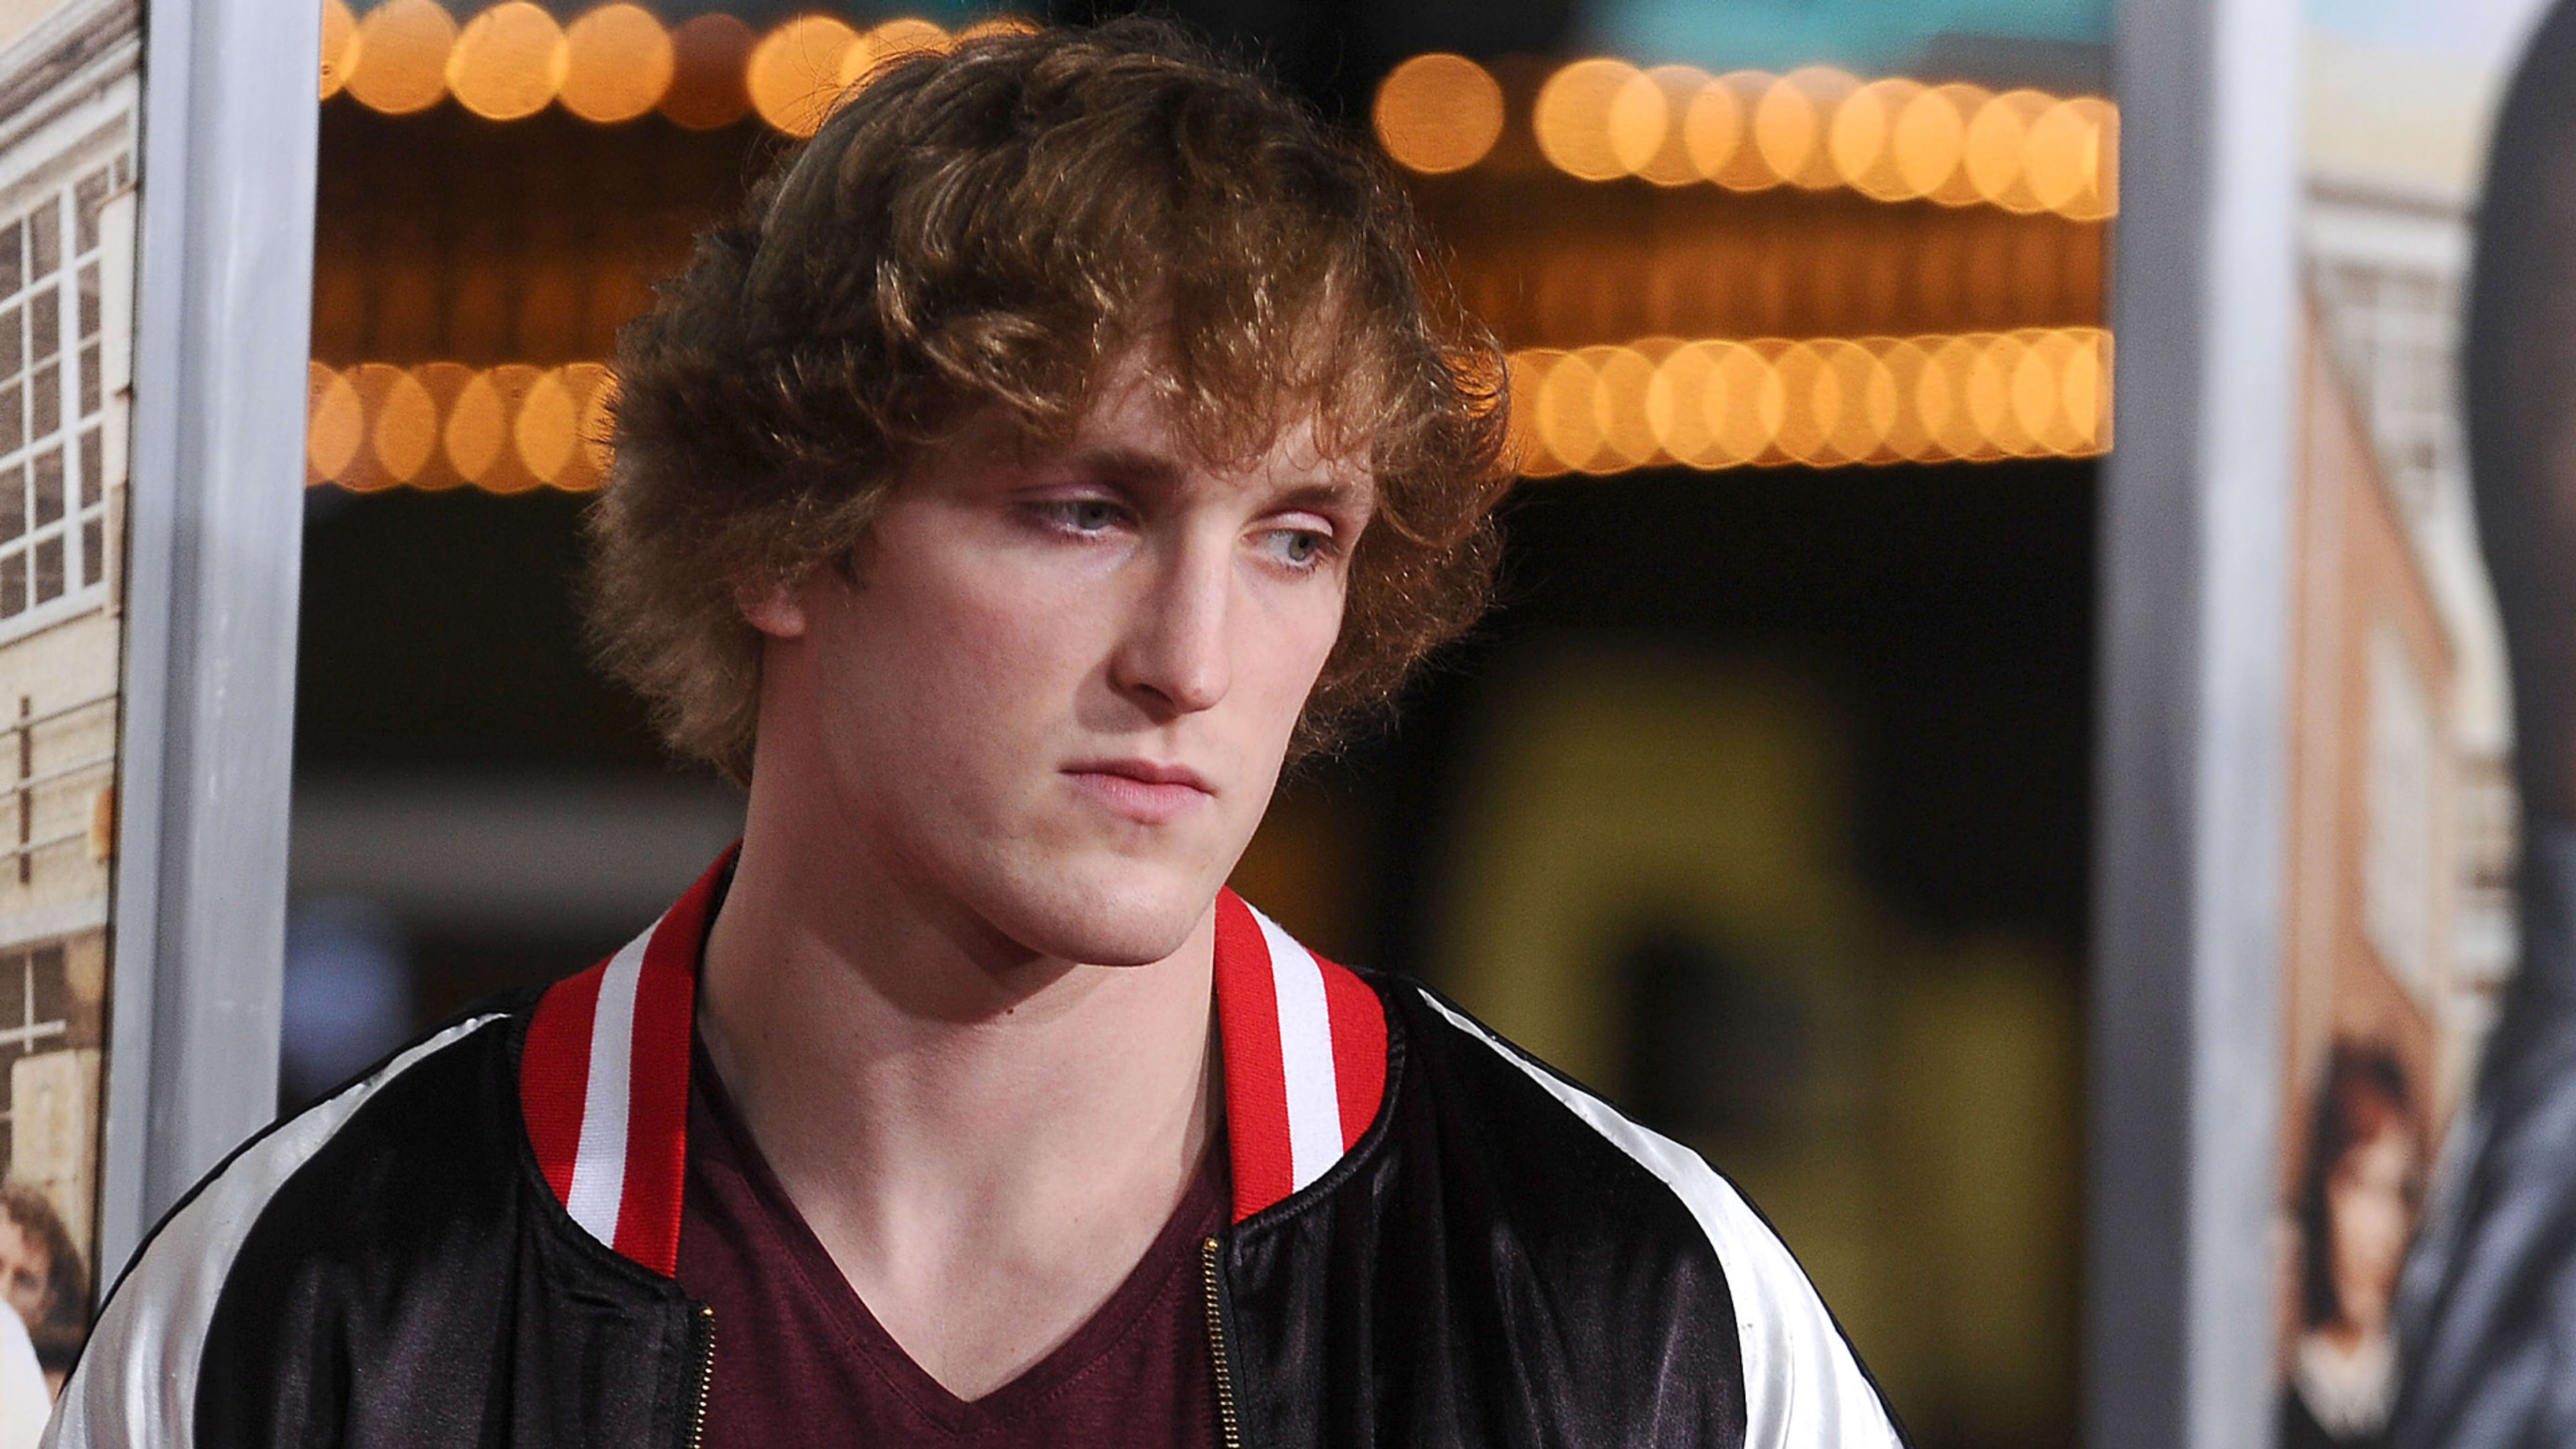 YouTube only sort of broke up with Logan Paul